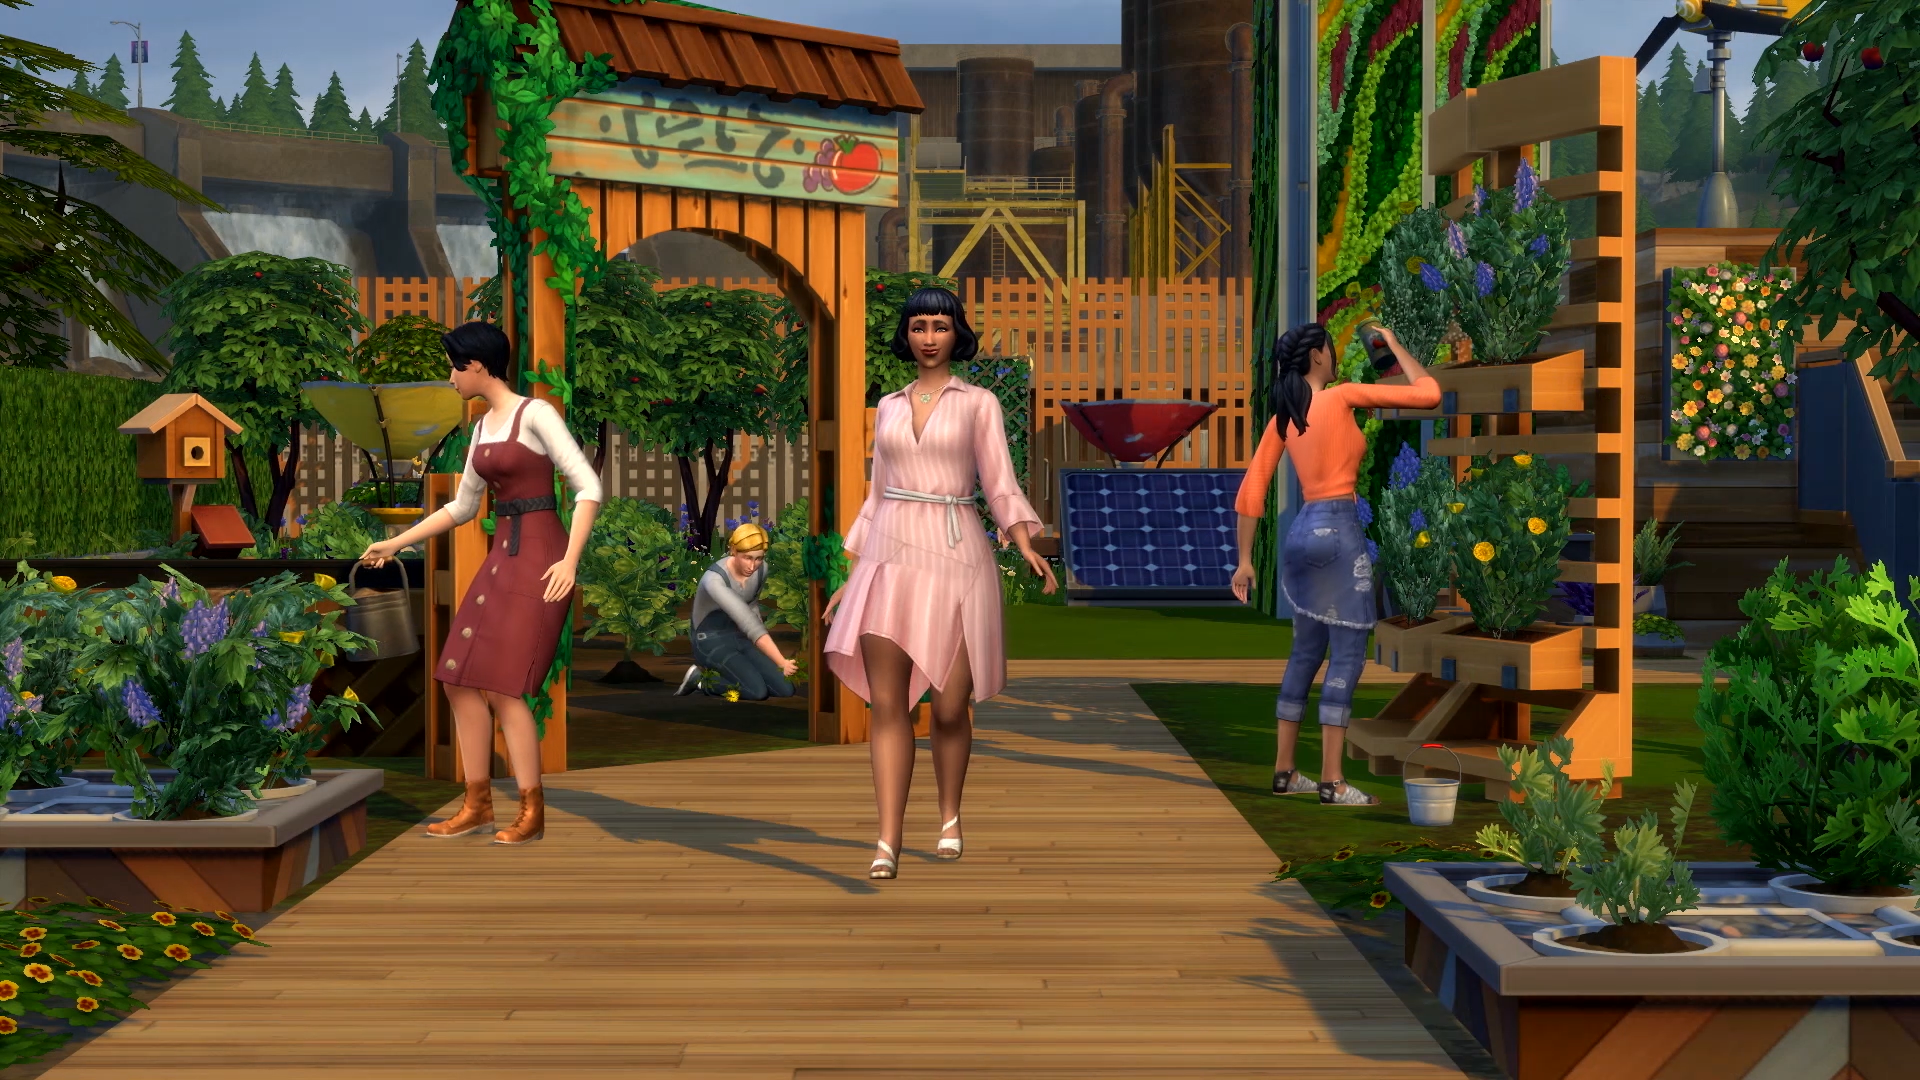 Screenshot from The SIms 4